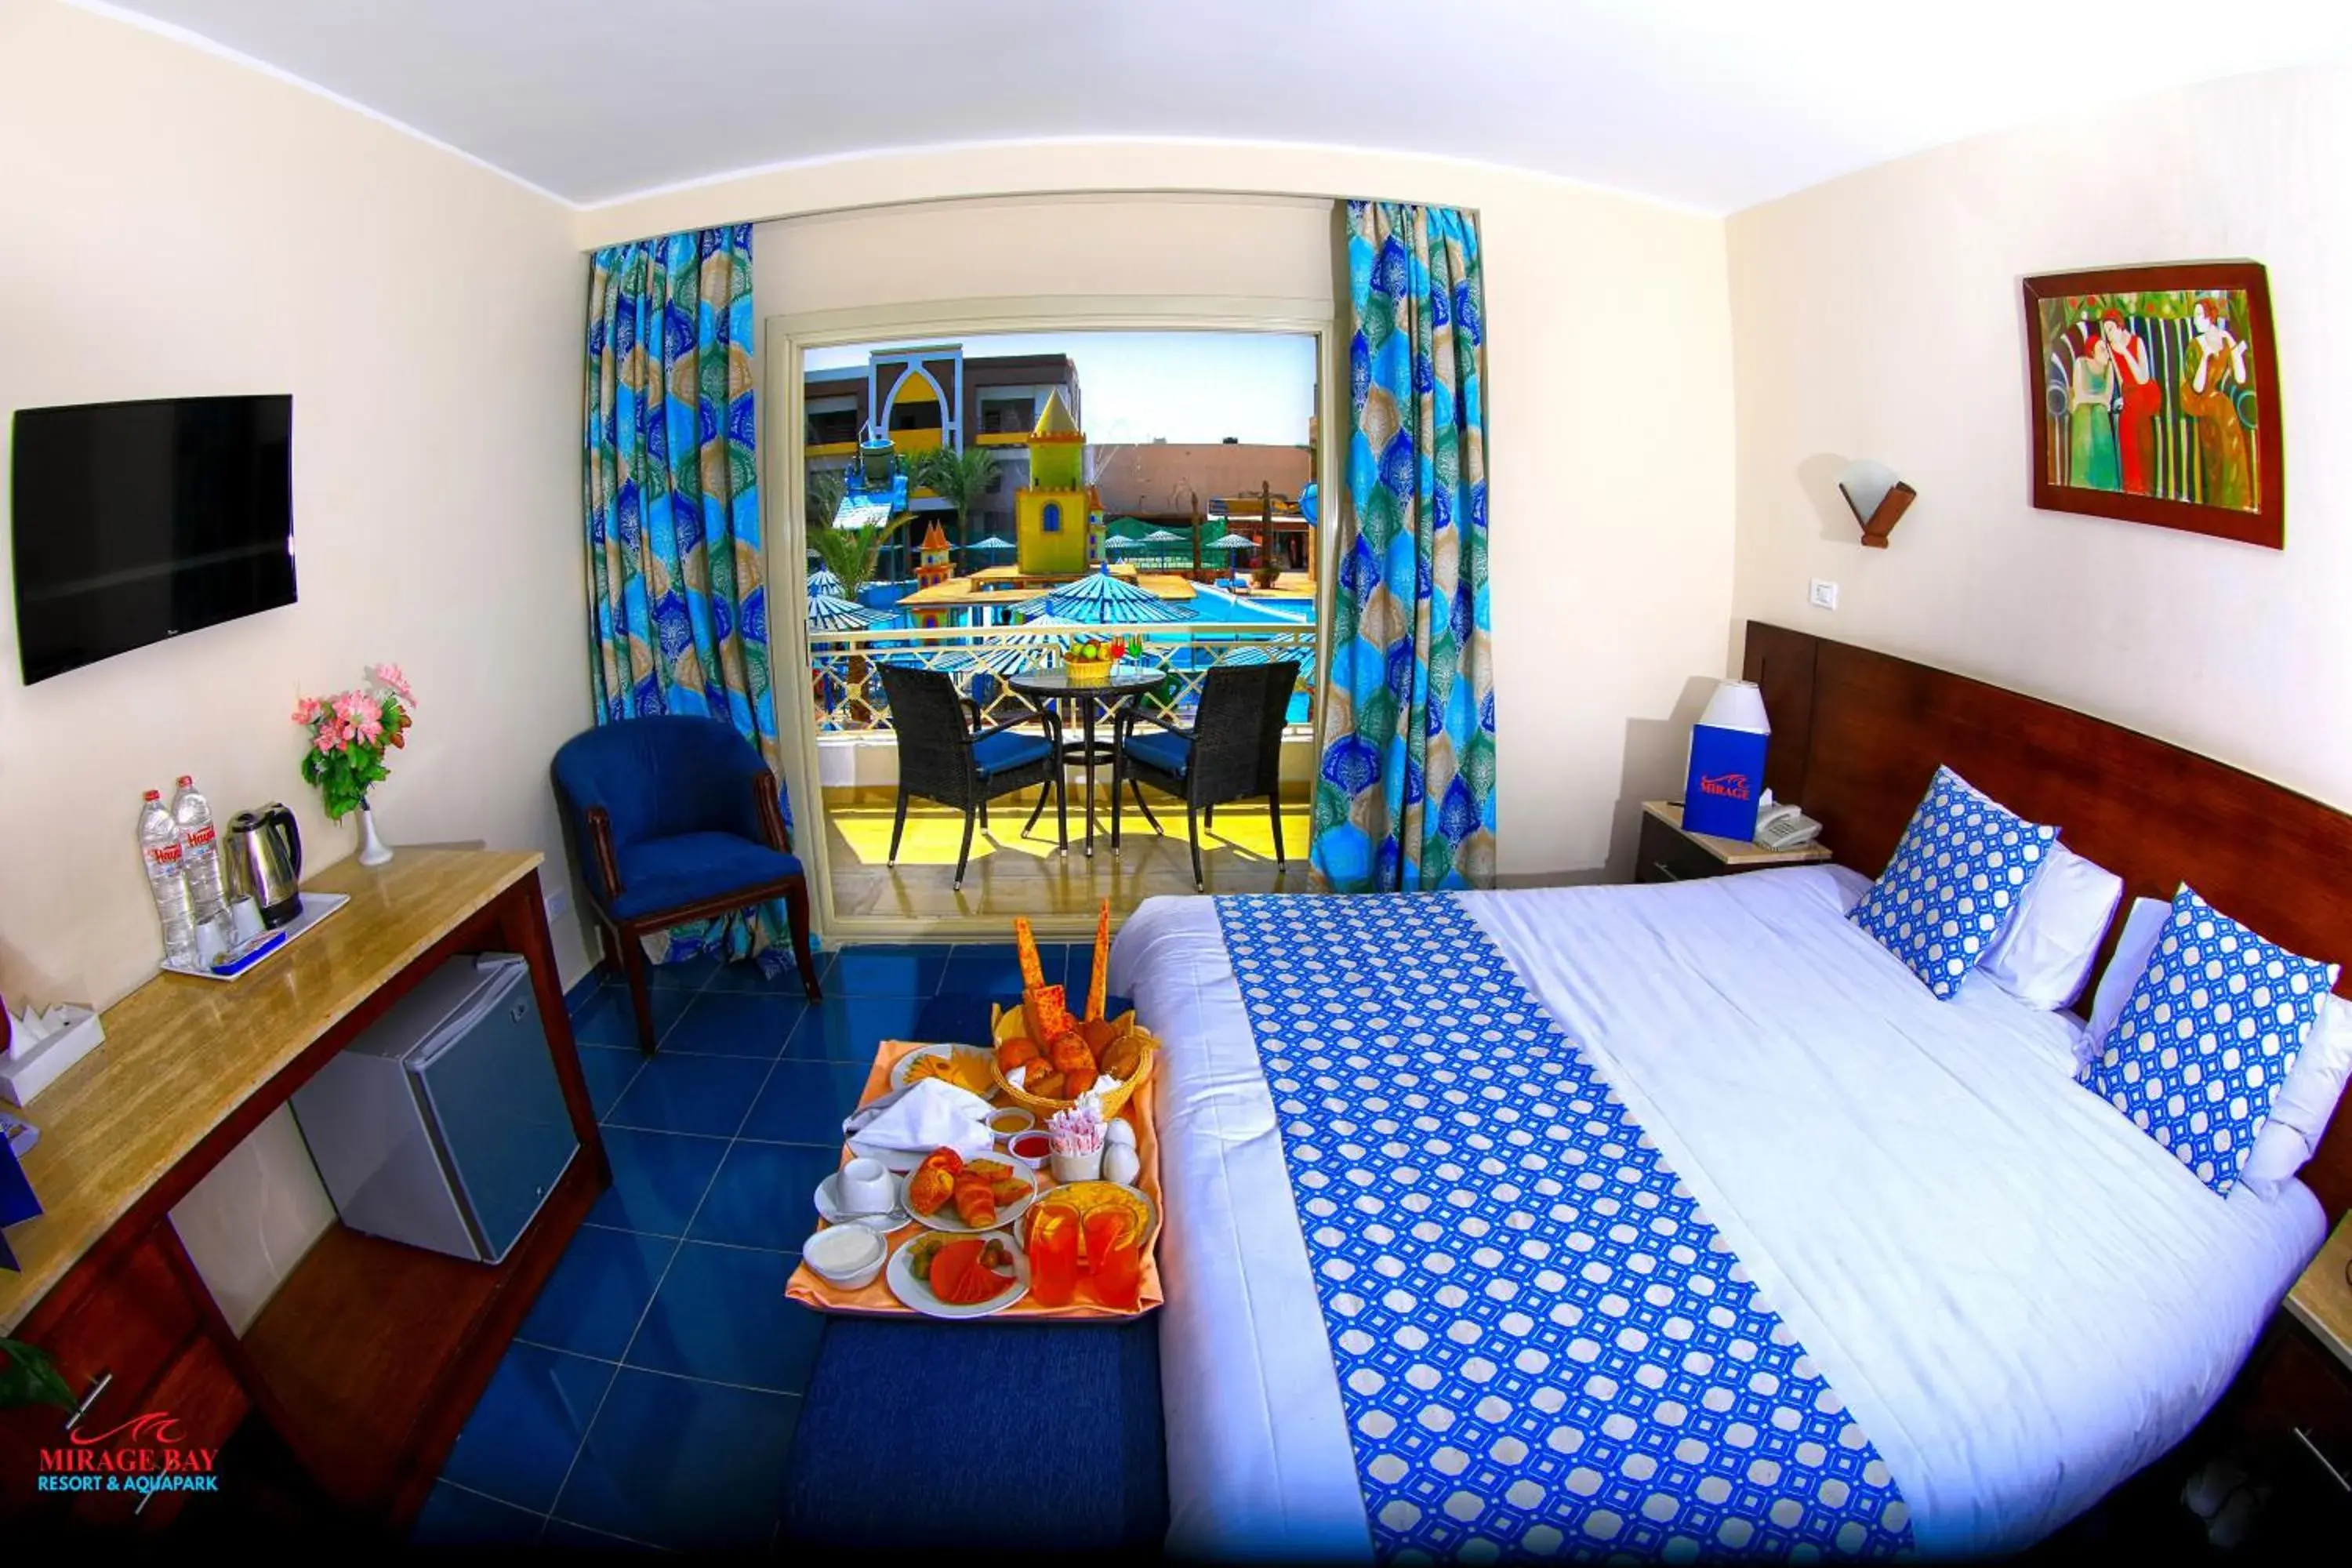 Photo of the whole room in Mirage Bay Resort & Aqua Park